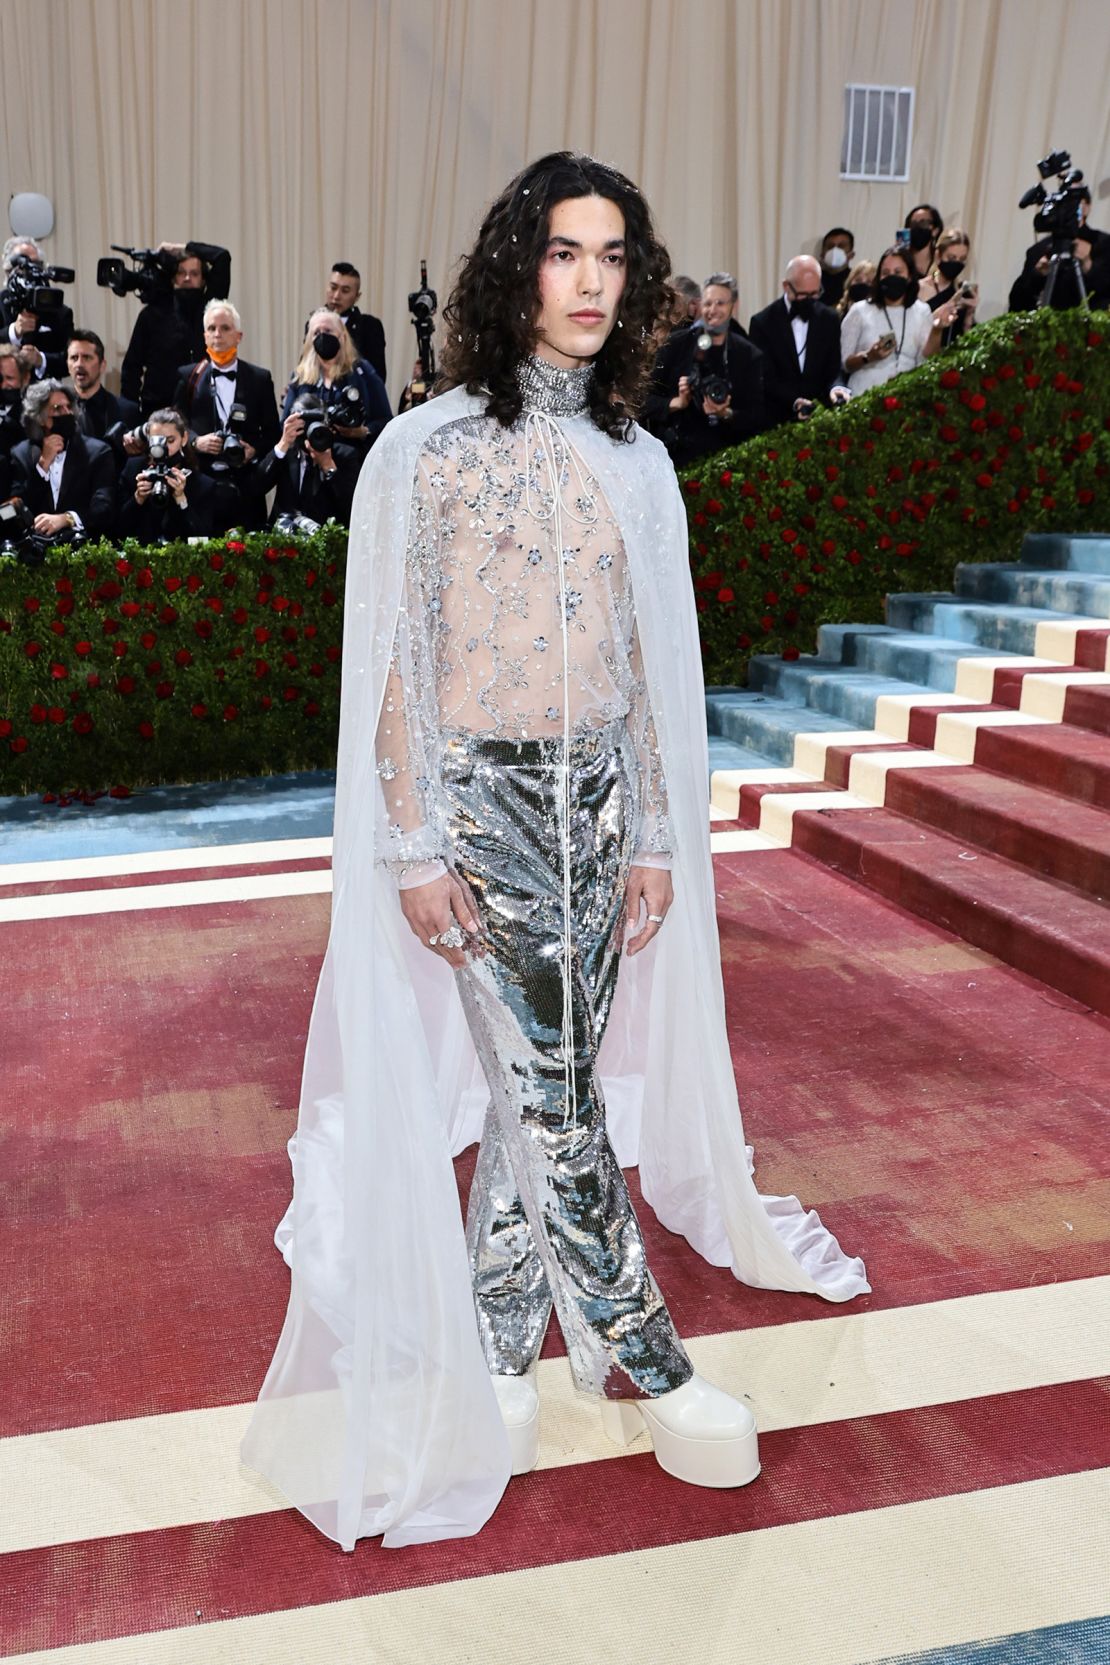 Conan Gray sparkled in a crystal-embellished outfit by Valentino, featuring a sheer mesh shirt, cape and sky high white platforms.